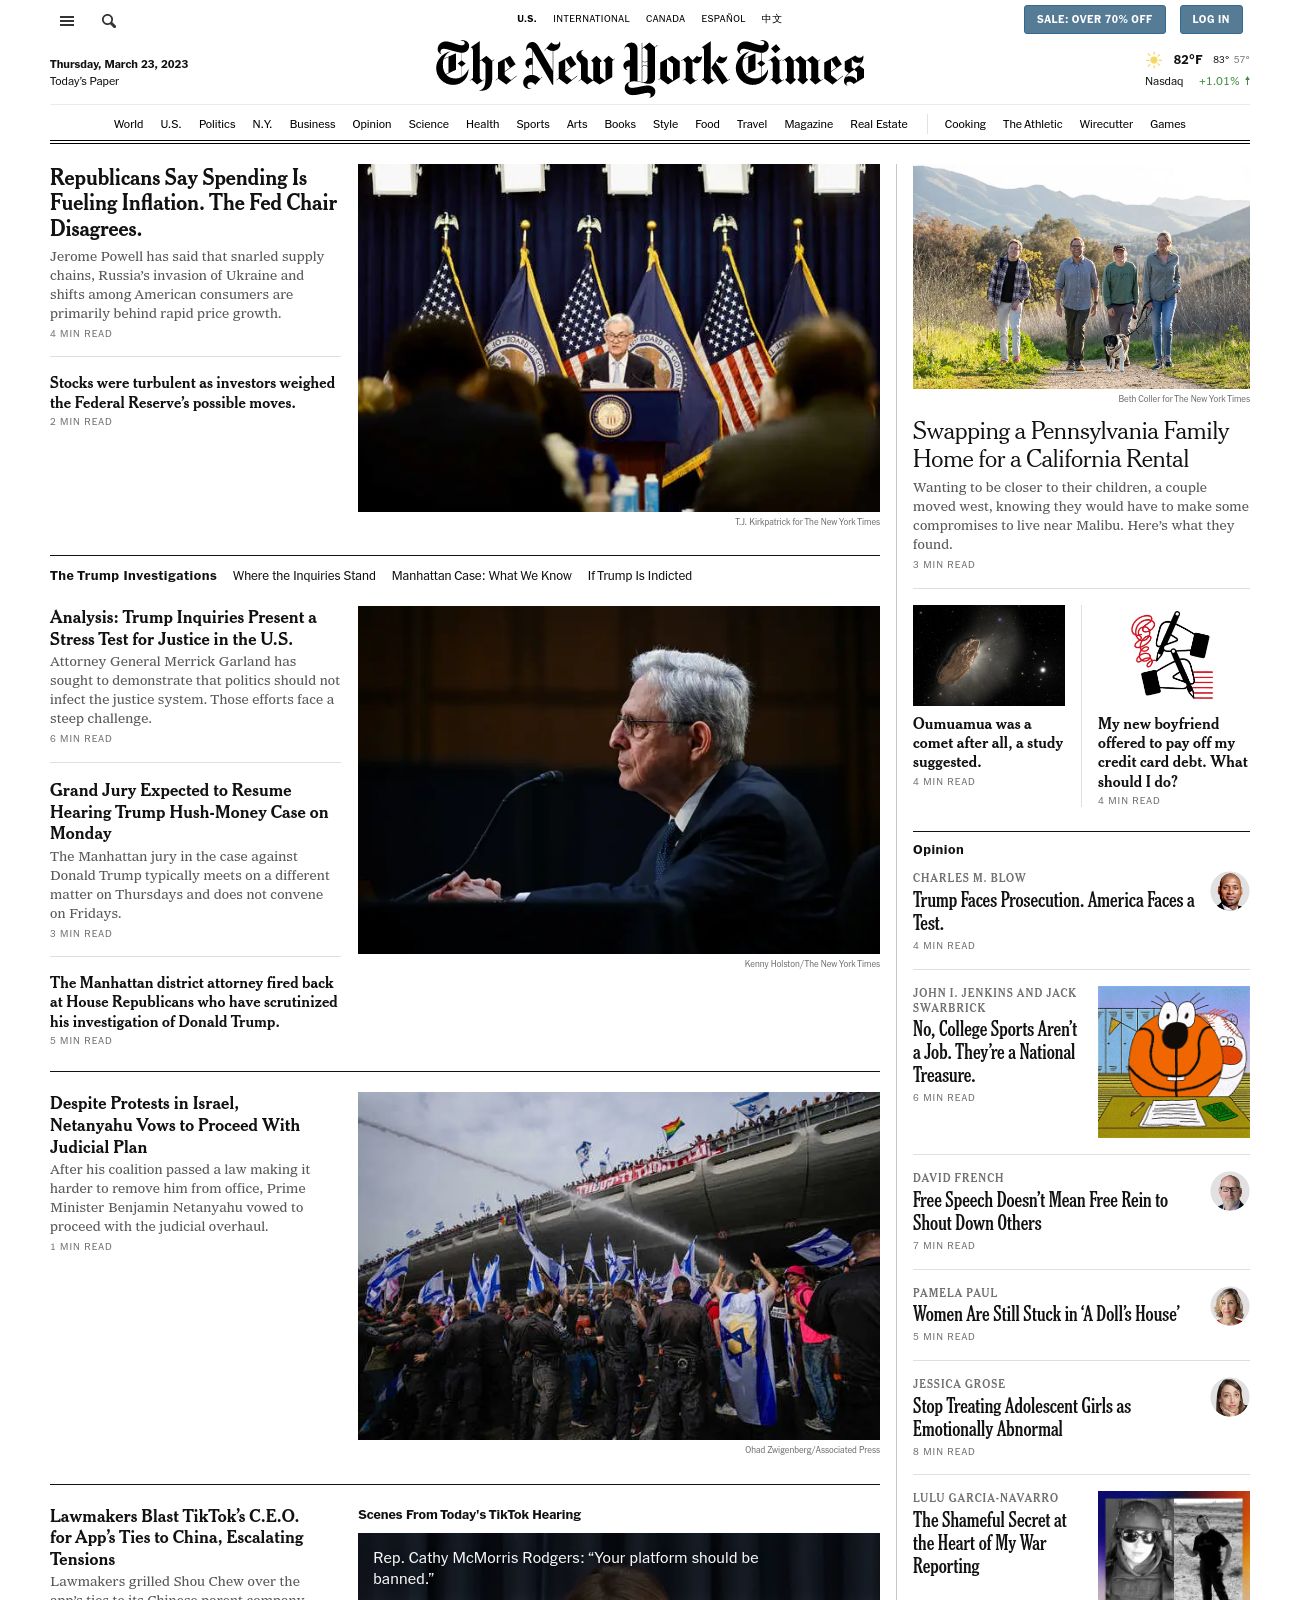 New York Times at 2023-03-23 17:12:23-04:00 local time